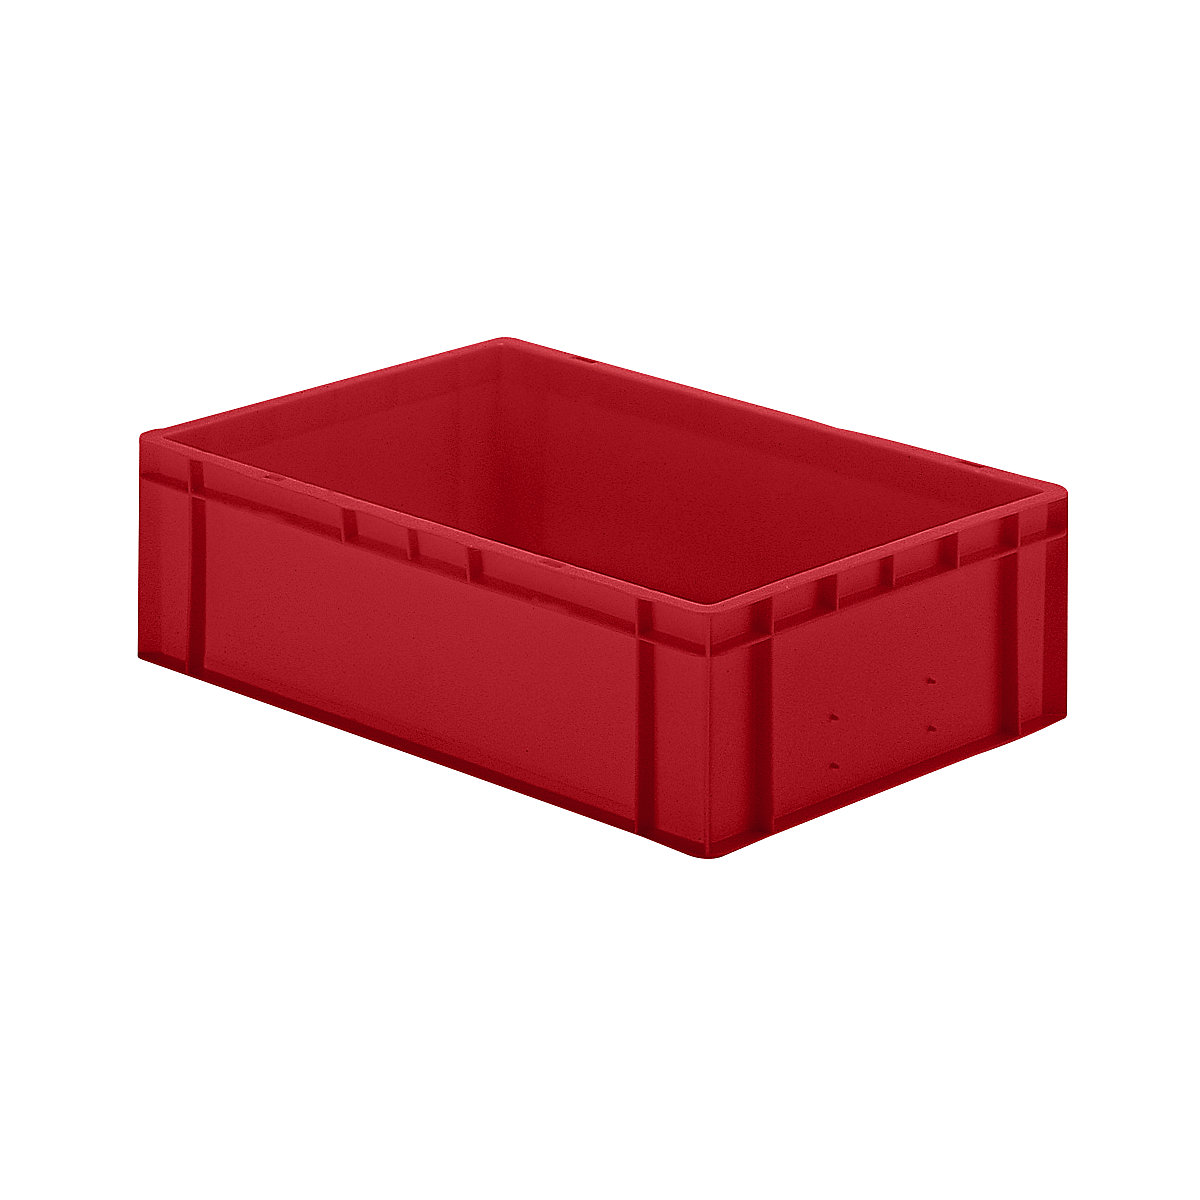 Euro stacking container, closed walls and base